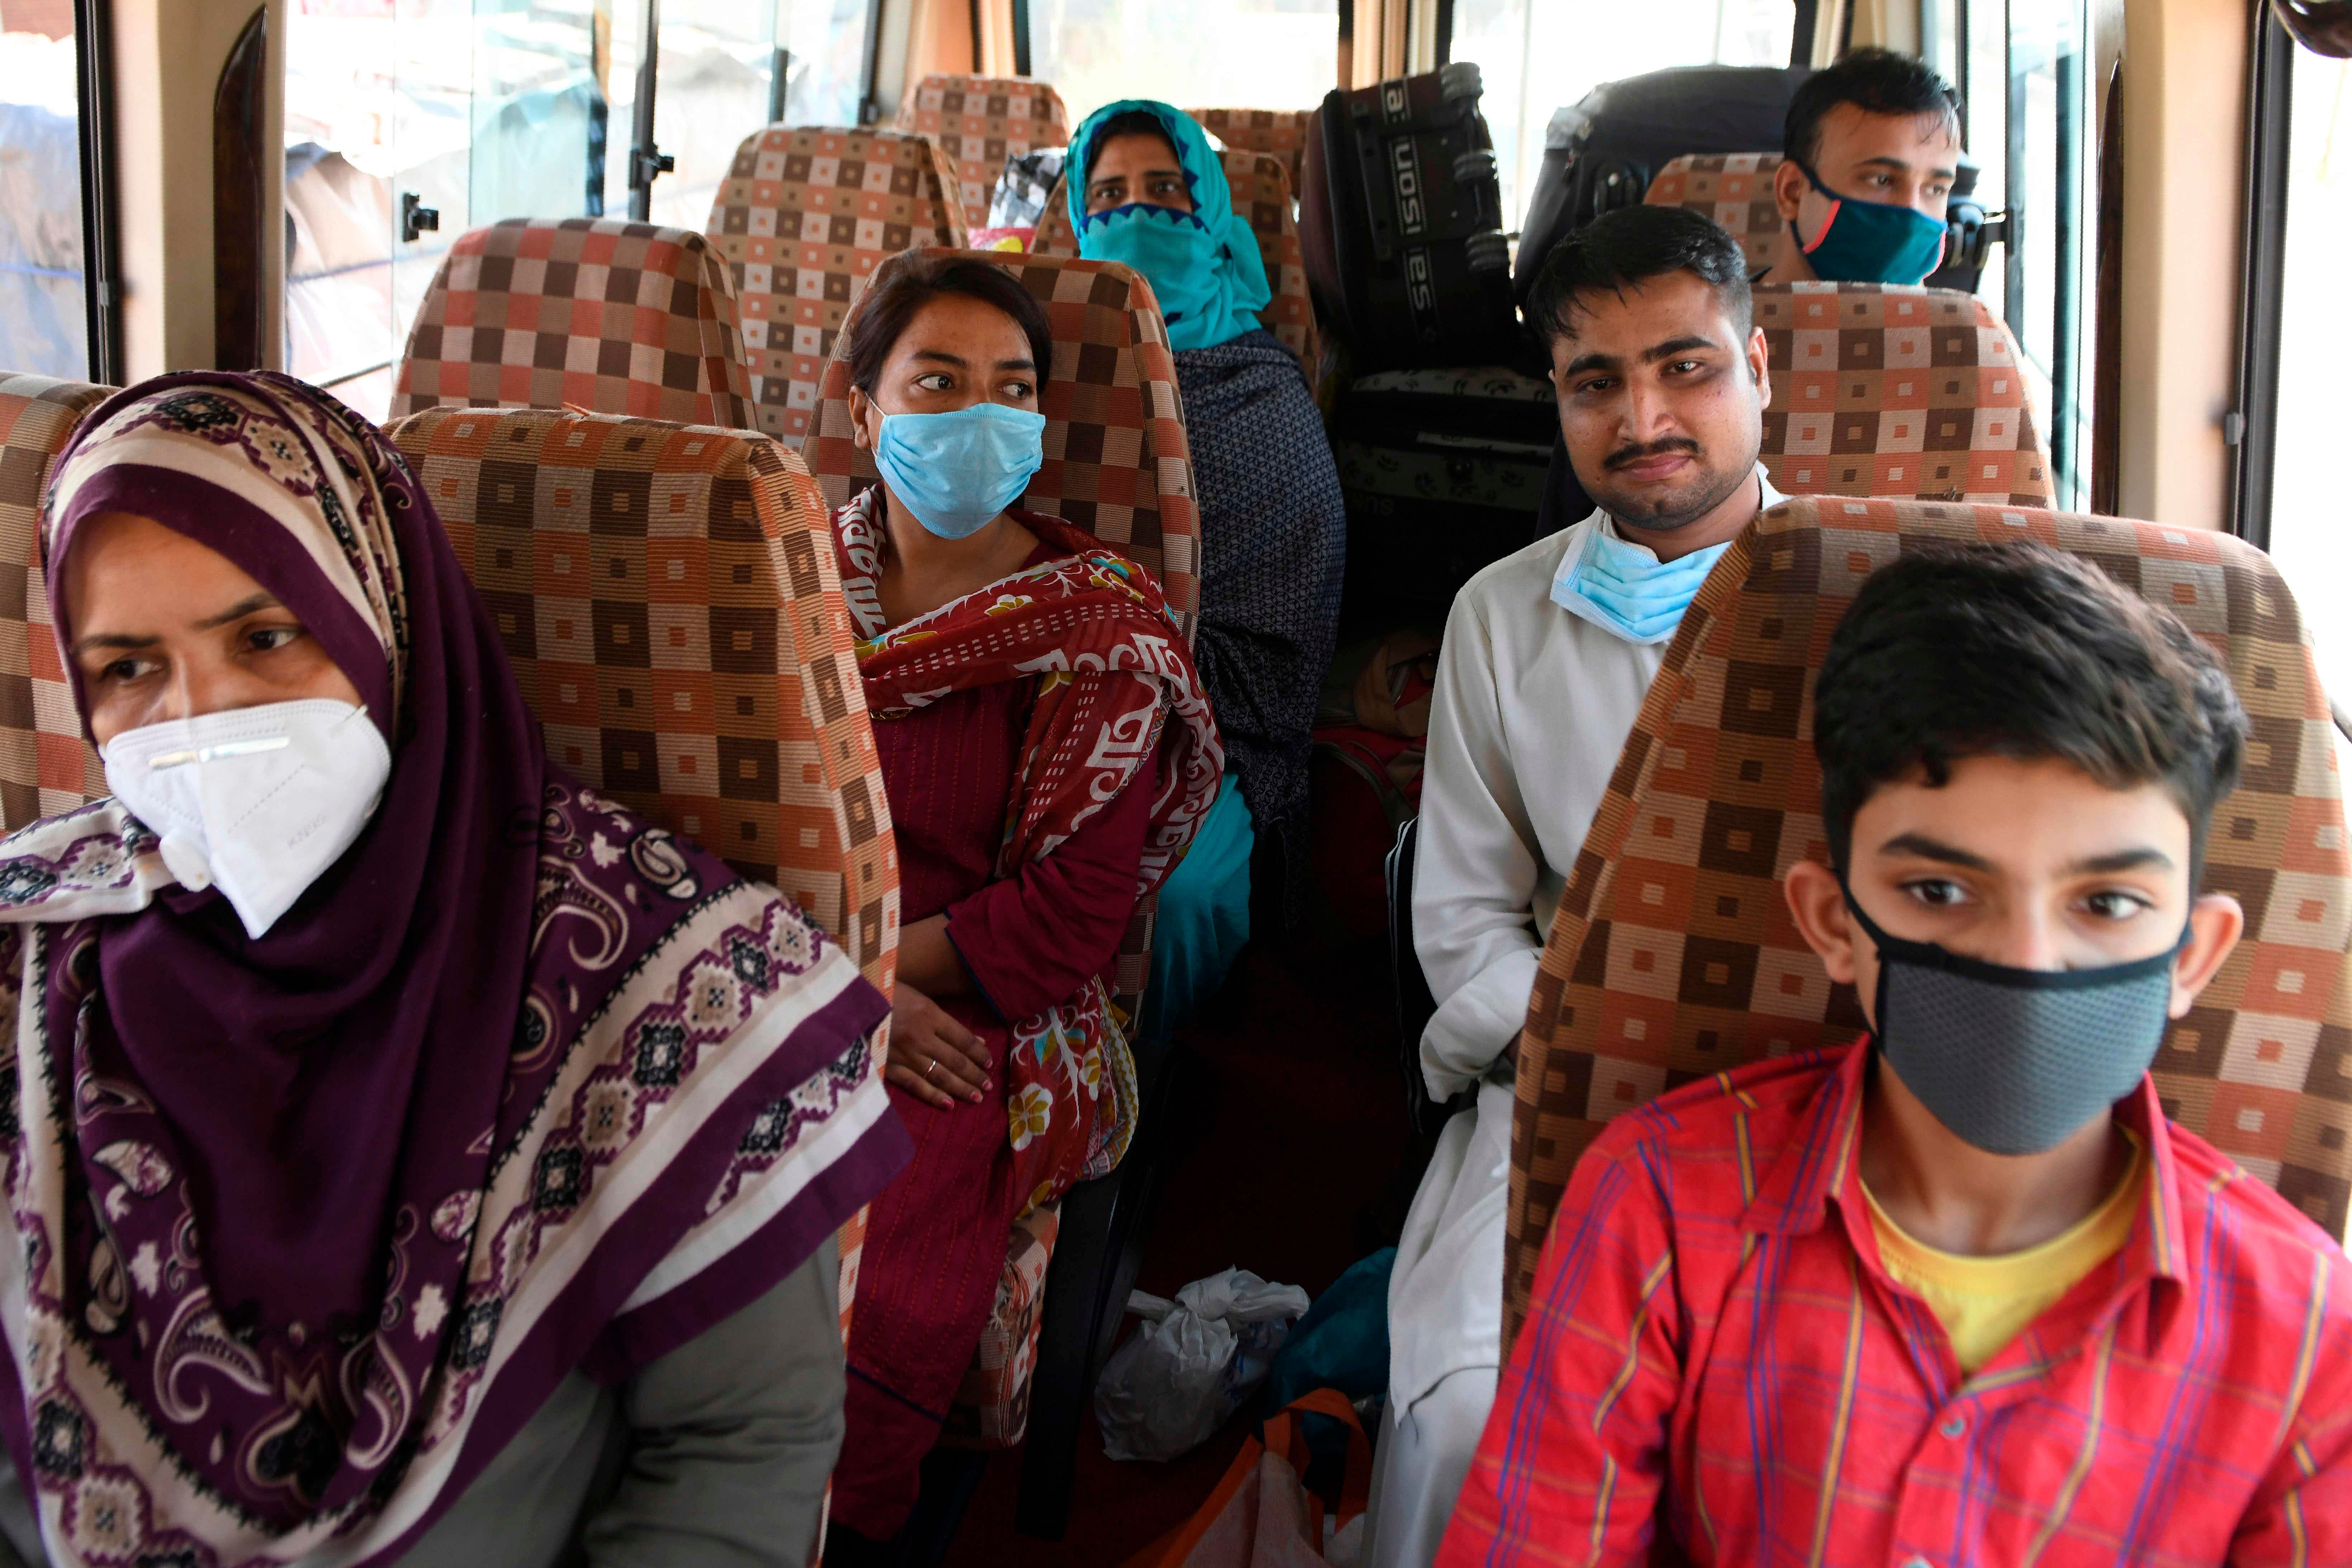 Pakistani nationals, who were stranded in India following the closure of borders due to the COVID-19 coronavirus lockdown, sit inside a mini bus before crossing the India-Pakistan Wagah border post, some 35 kms from Amritsar on May 27, 2020. (Photo by AFP)